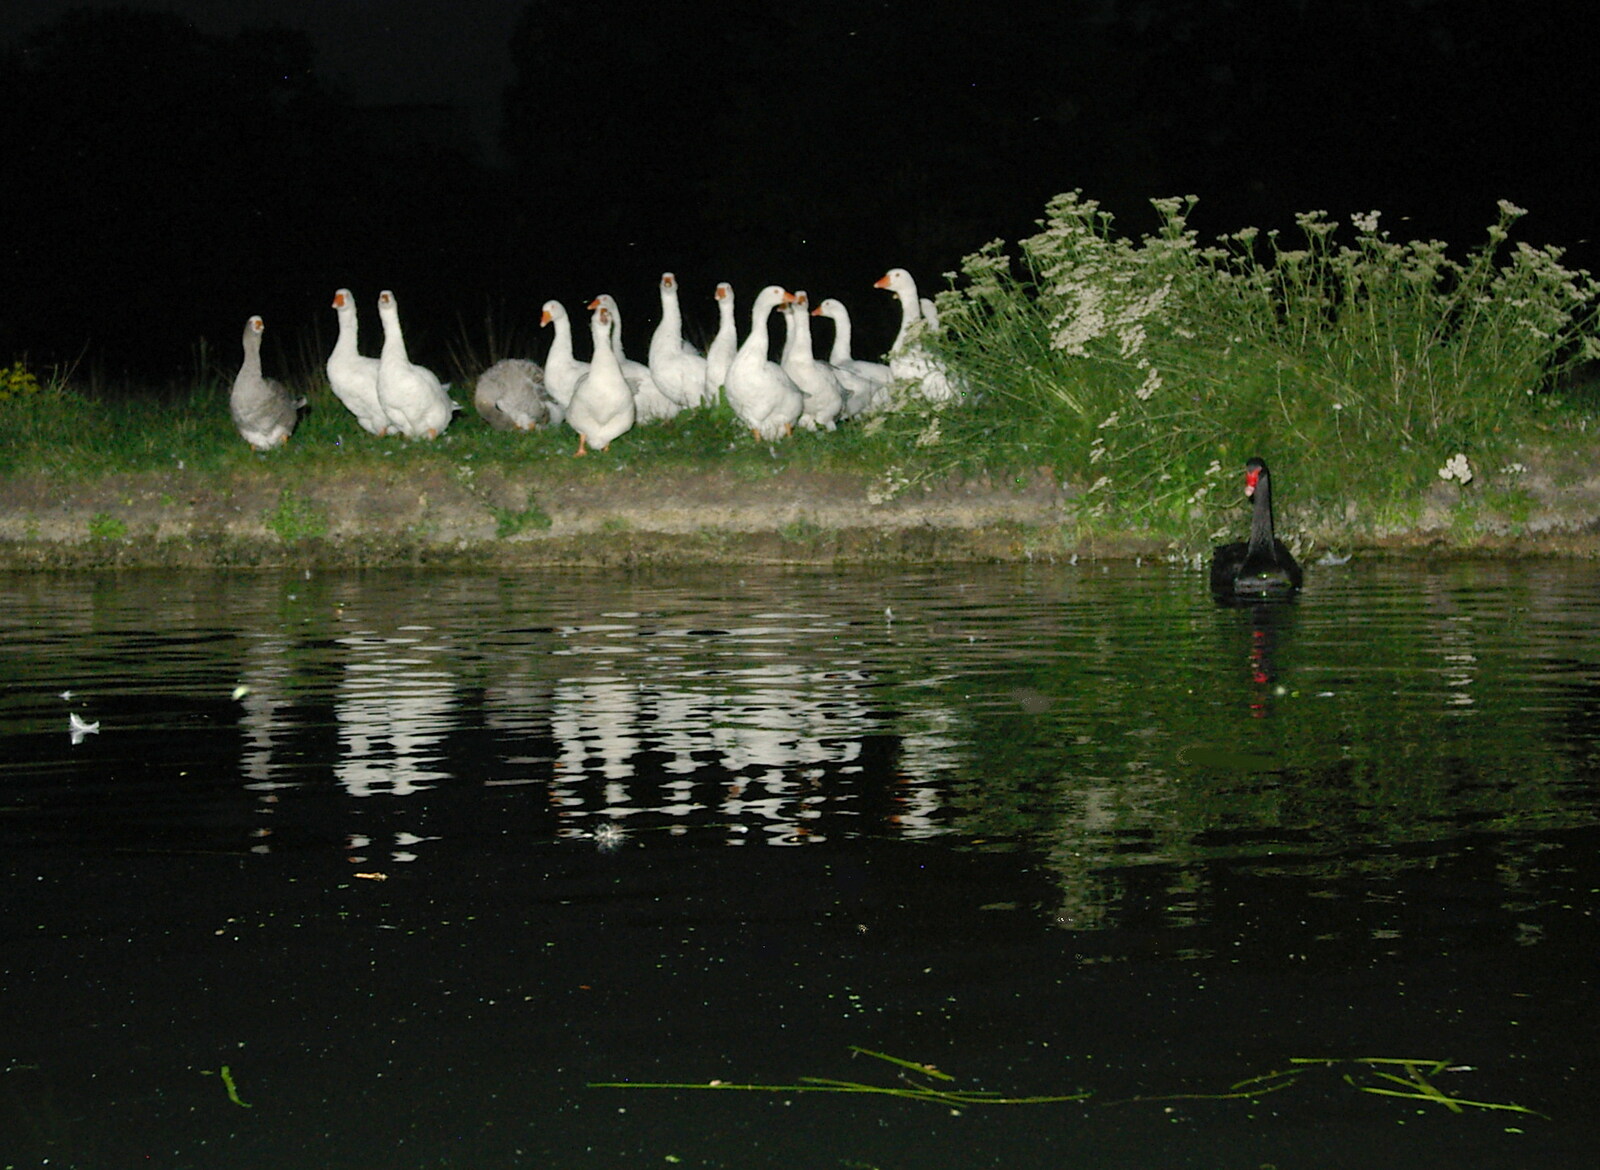 Geese wait as two swans face off across the river from Qualcomm goes Punting on the Cam, Grantchester Meadows, Cambridge - 18th August 2005